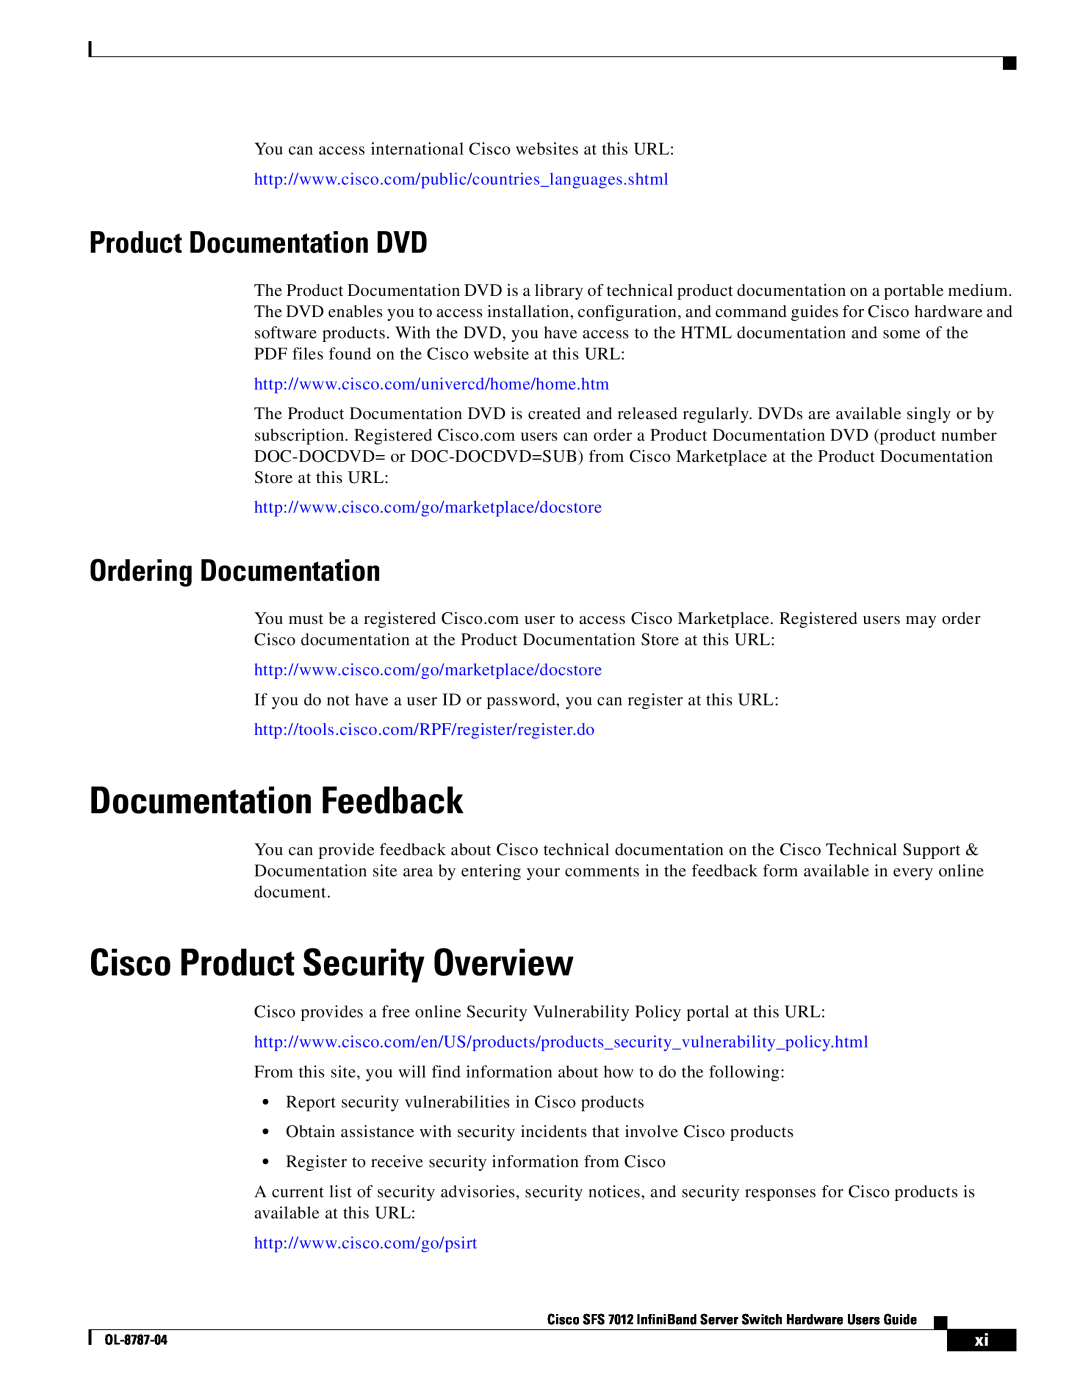 Cisco Systems SFS 7012 manual Documentation Feedback, Cisco Product Security Overview, Product Documentation DVD 